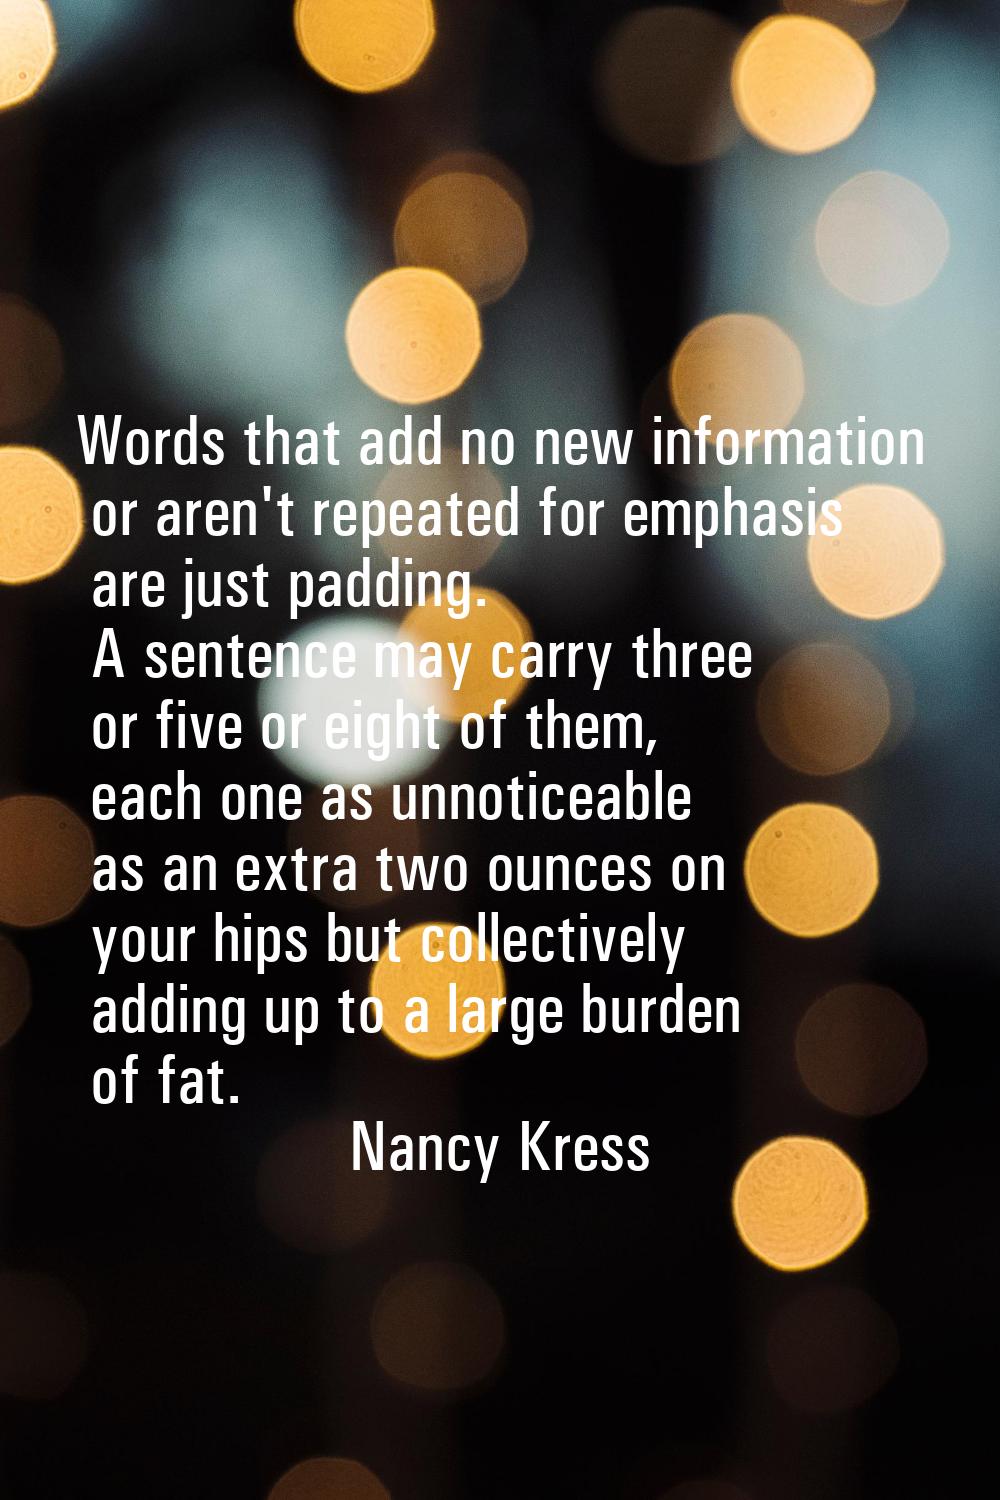 Words that add no new information or aren't repeated for emphasis are just padding. A sentence may 